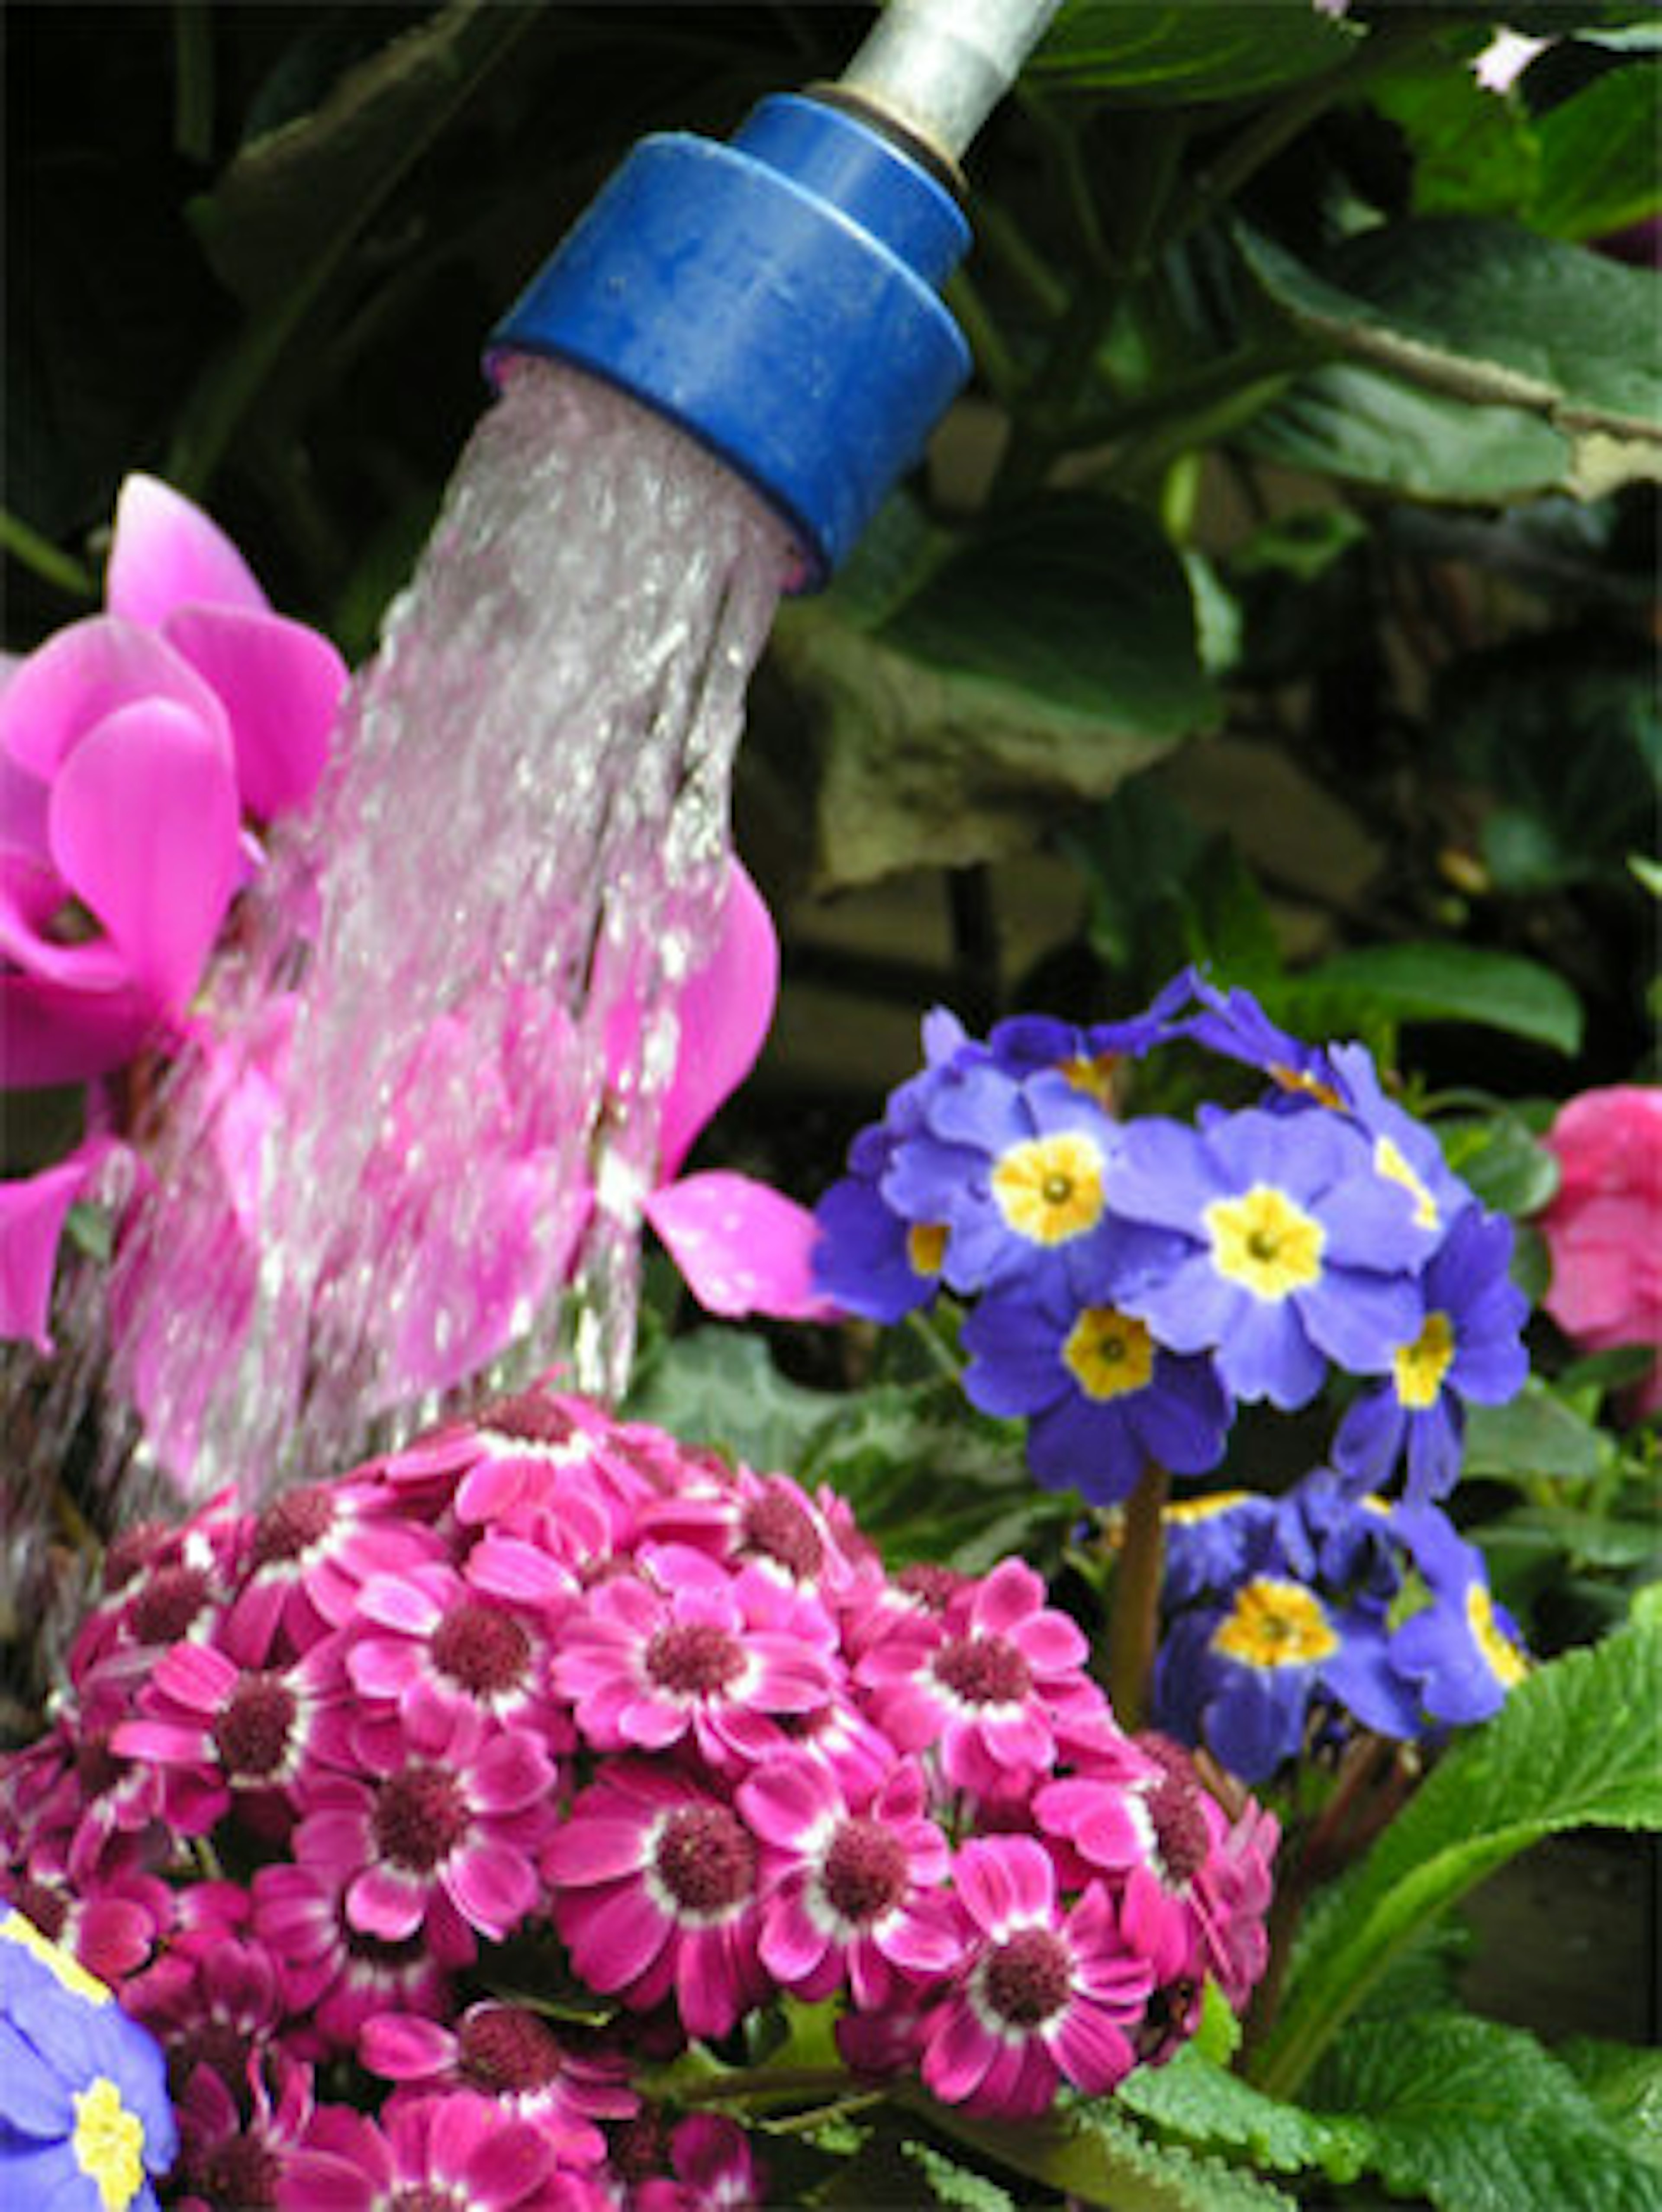 A photo of plants receiving water from a watering can